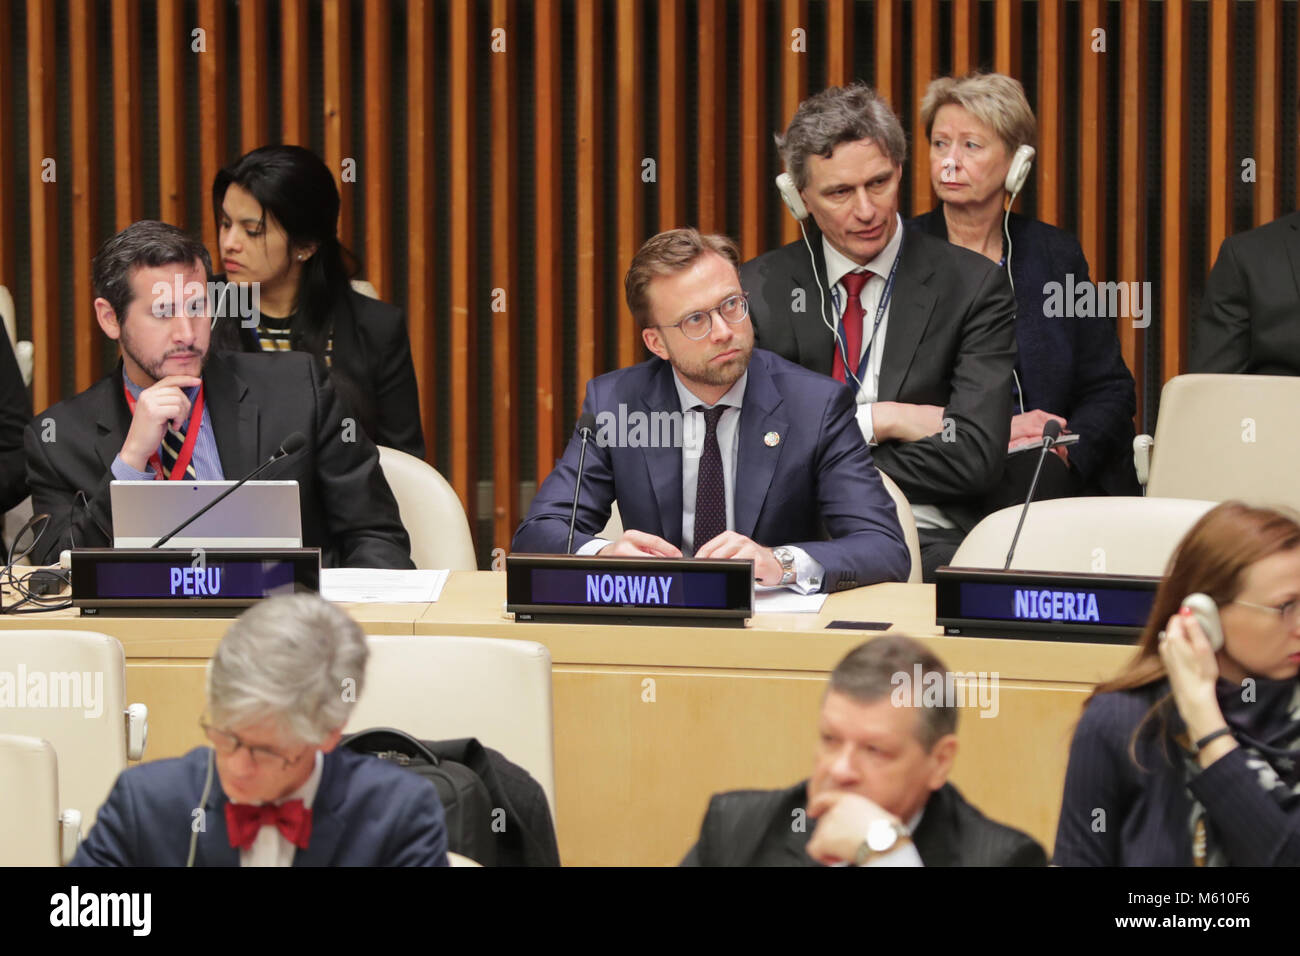 February 27, 2018 - New York, NY, USA - United Nations, New York, USA, February 27 2018 - Nikolai Astrup, Norwegian Development Minister During the Economic and Social Council Operational Activities for Development and Repositioning the United Nations Development System to Best Deliver for People and Planet today at the UN Headquarters in New York..Photo: Luiz Rampelotto/EuropaNewswire (Credit Image: © Luiz Rampelotto via ZUMA Wire) Stock Photo